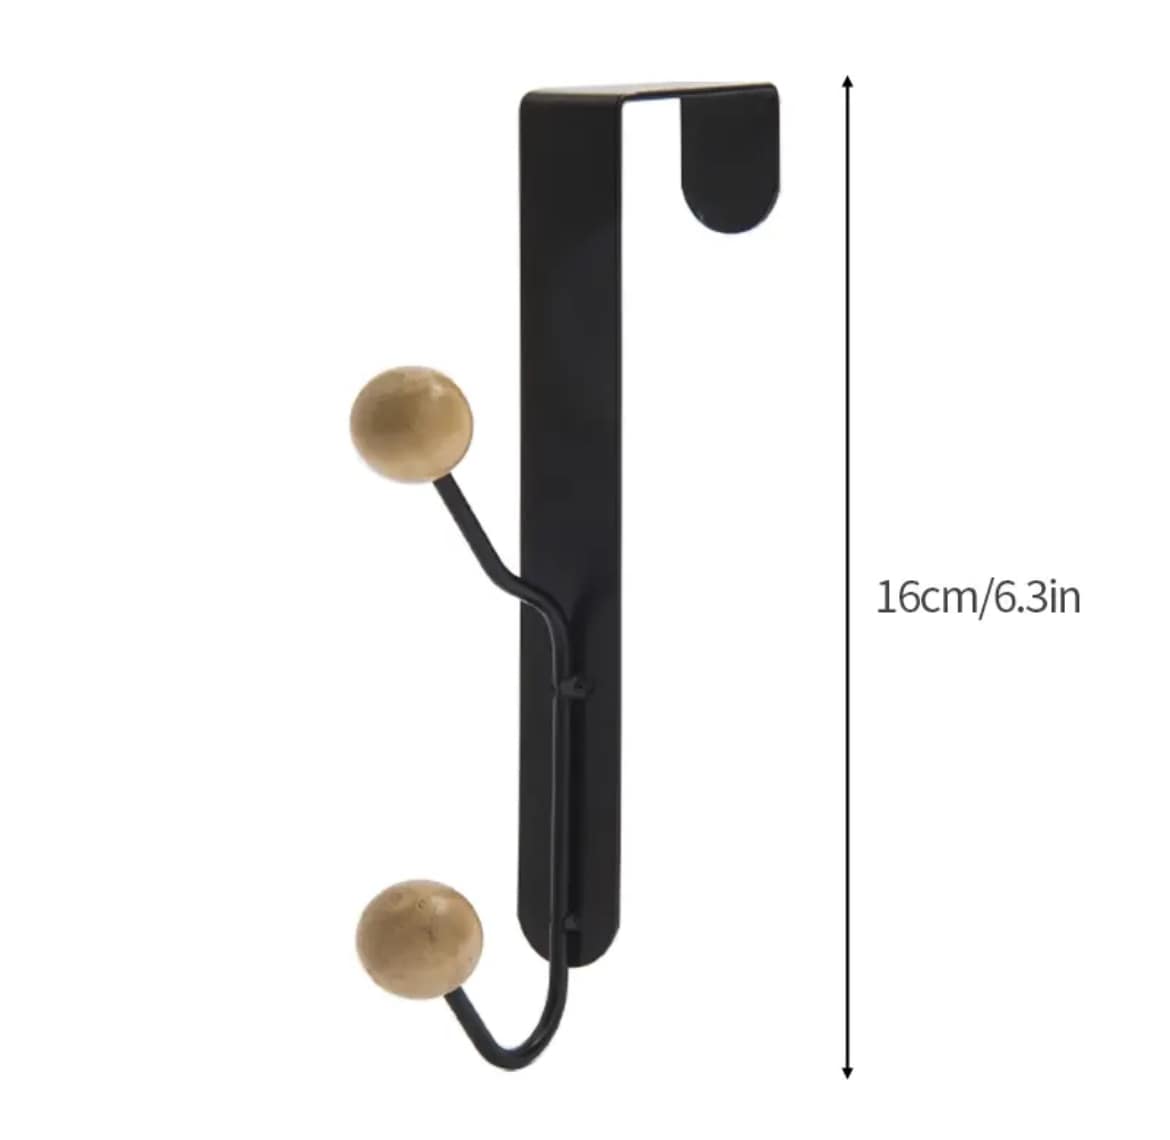 Wooden back hook organizer for clothing storage, enhancing the retro appeal of Nordic decor.